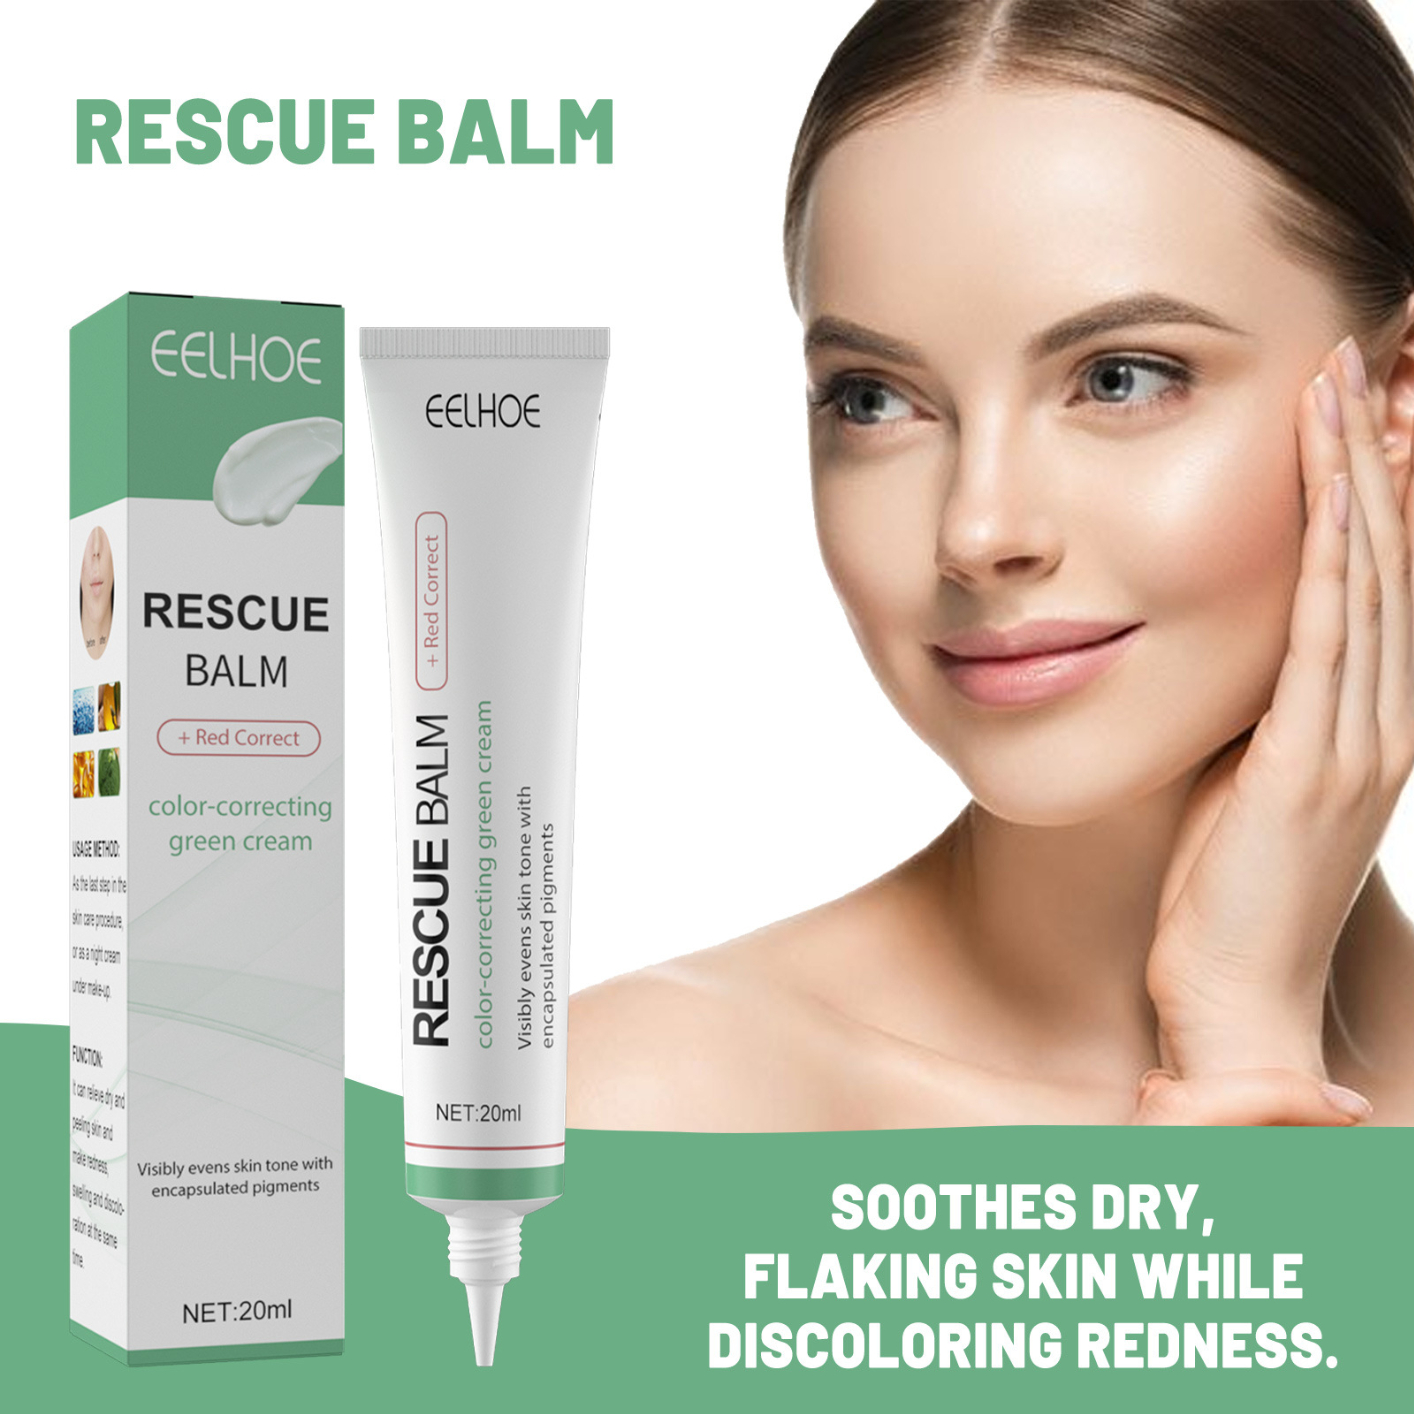 Rescue Balm +Red Correct Post-Blemish Recovery Cream Intensive Nourishing and Calming for Dry, Red-Looking Skin After a Blemish